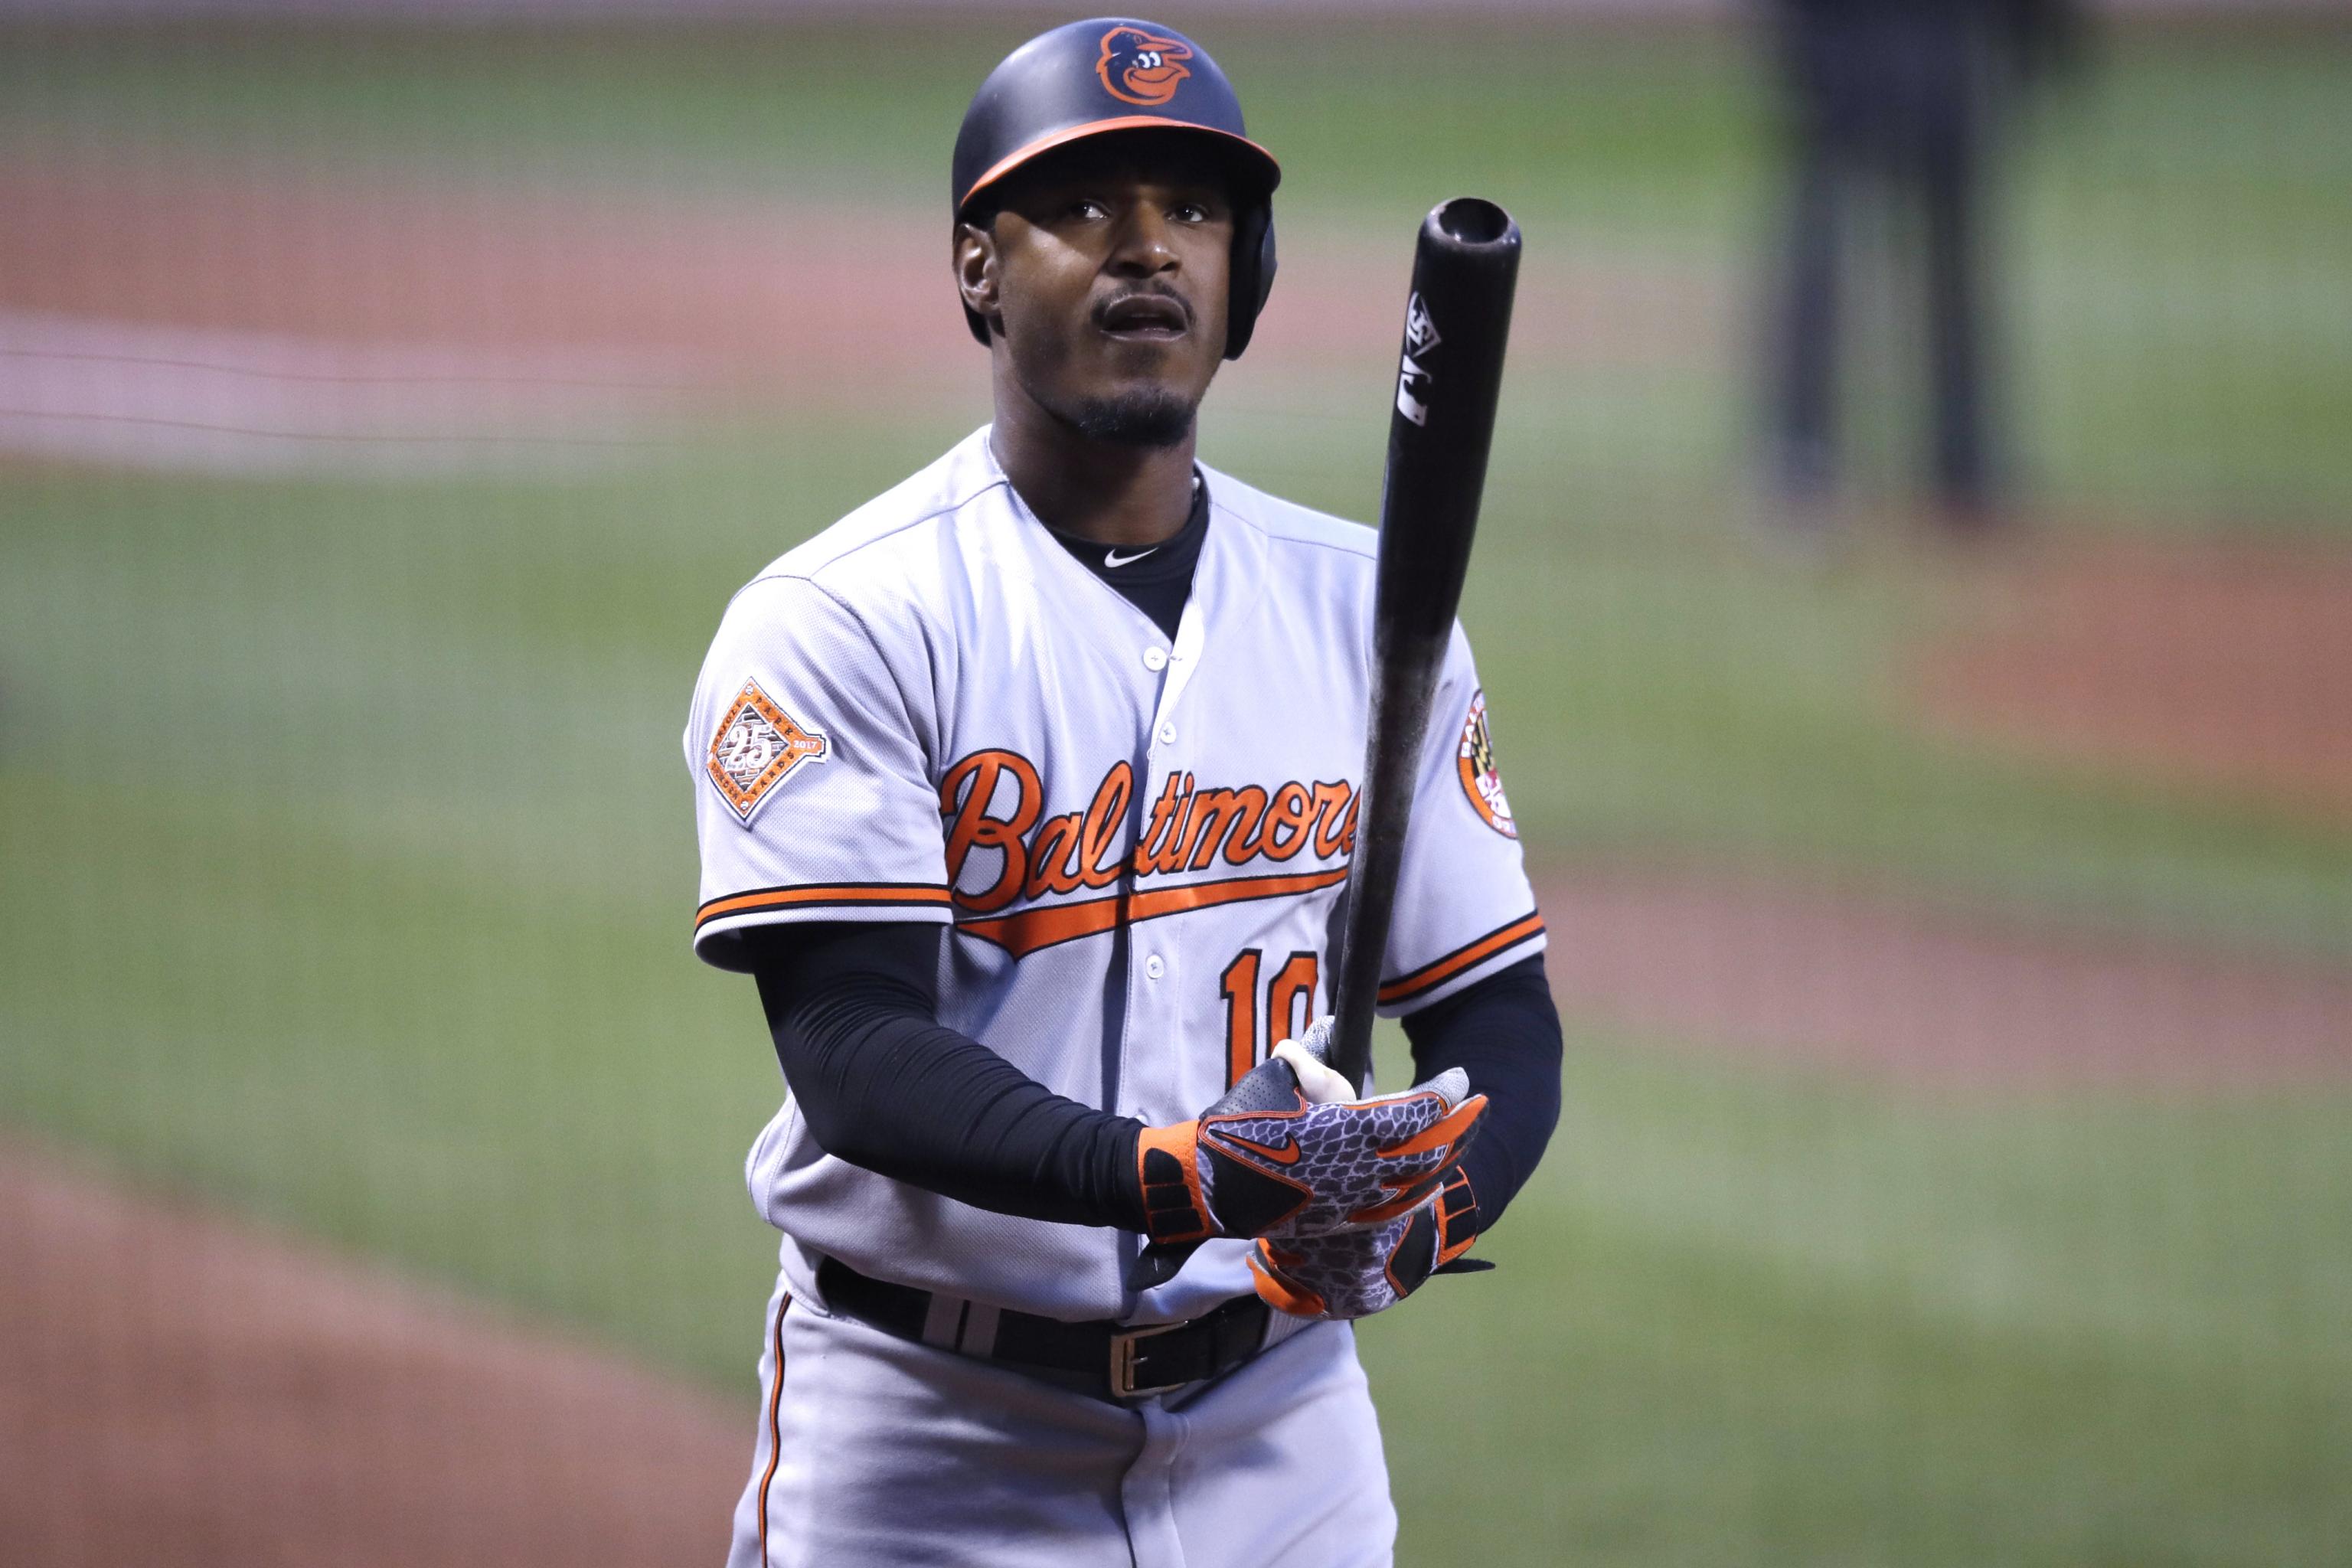 Red Sox Fans Give Adam Jones a Standing Ovation at Fenway - The